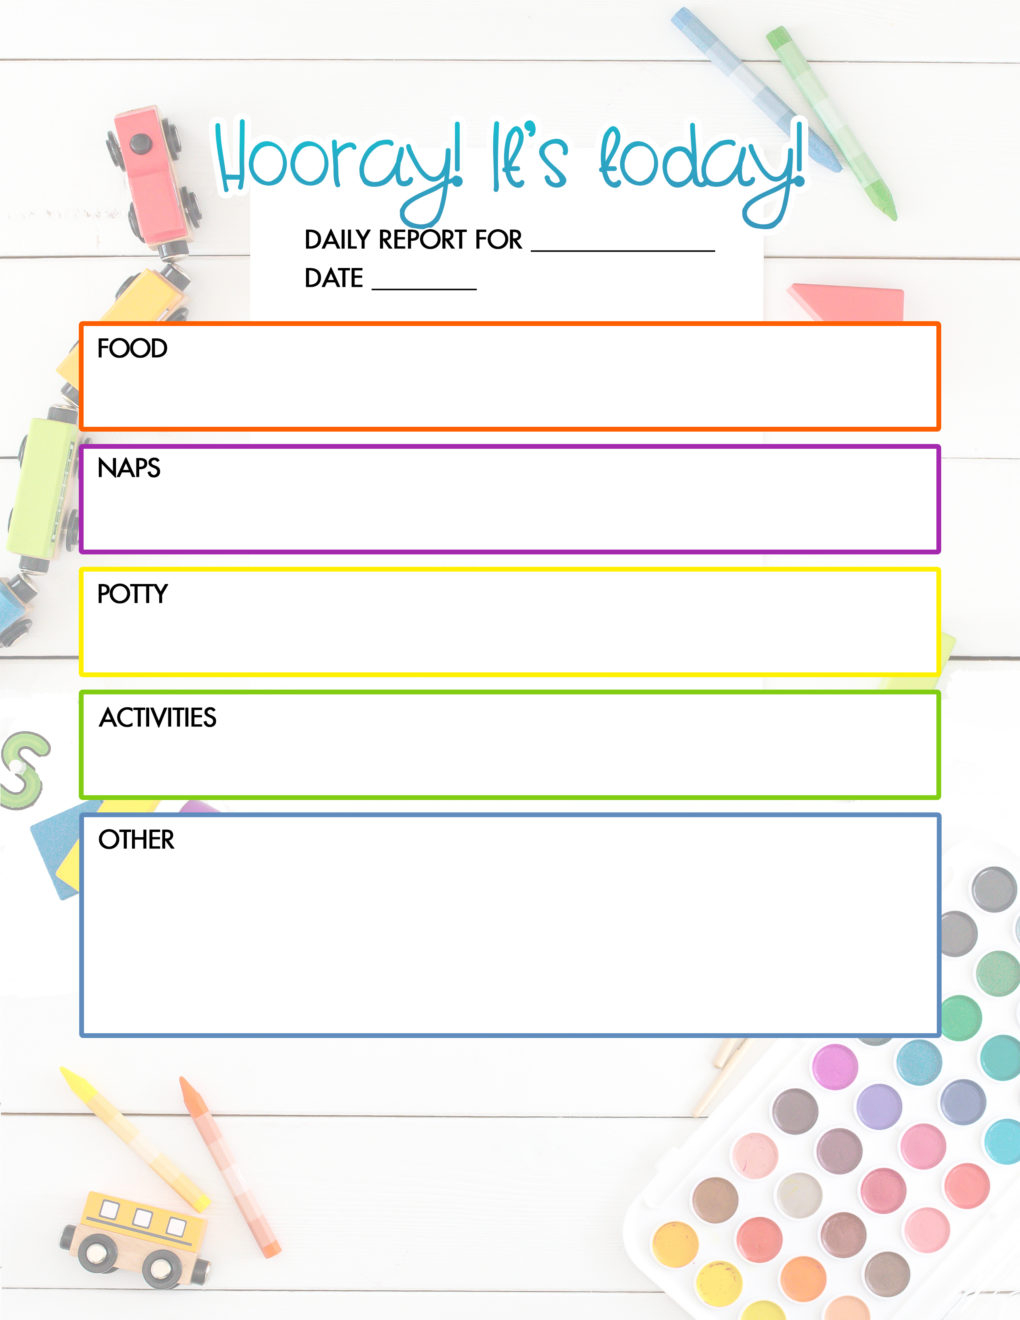 Free Daycare Daily Report  Child Care Printable - The DIY Lighthouse Inside Daycare Infant Daily Report Template